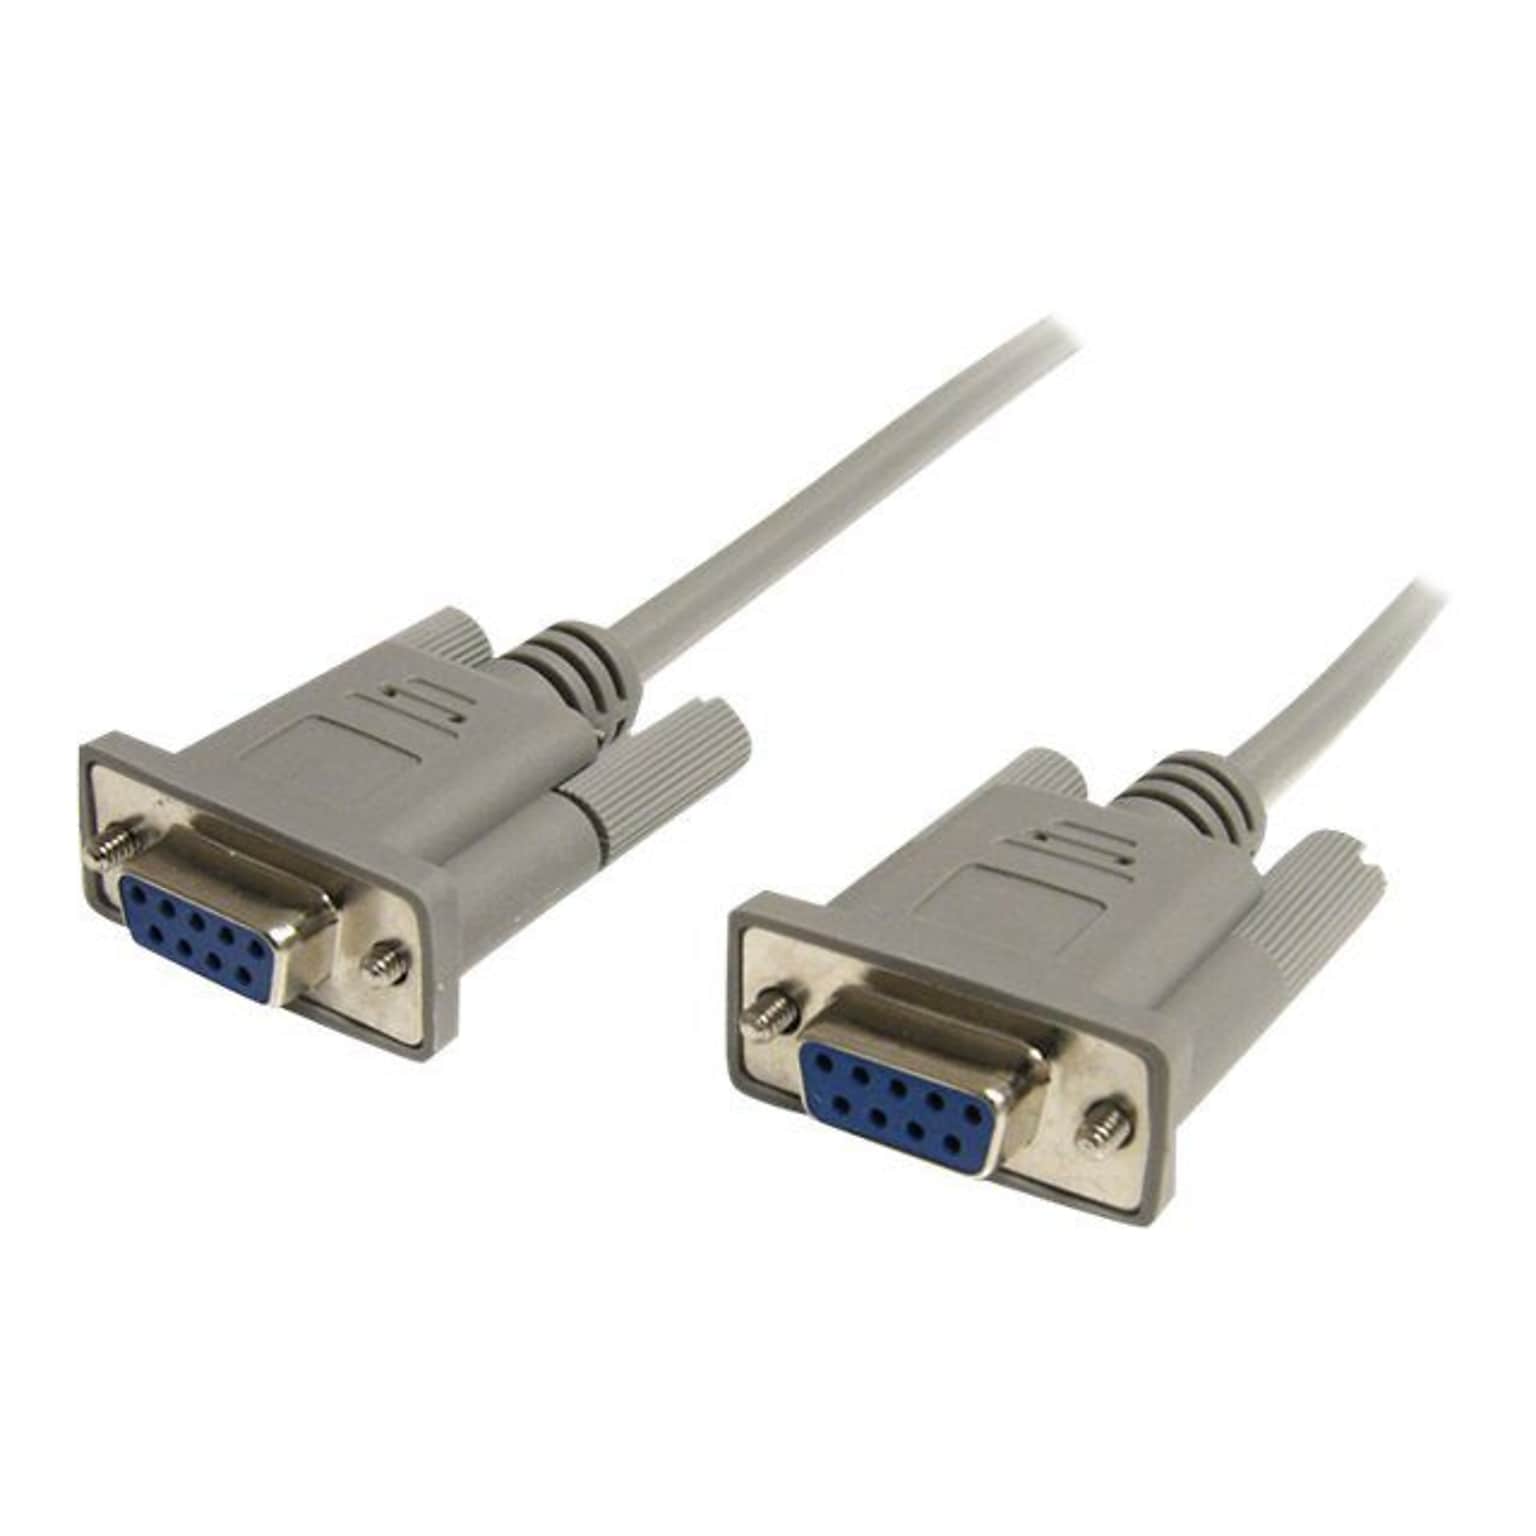 StarTech® 25 DB9 Null Modem Data Transfer Cable; Gray